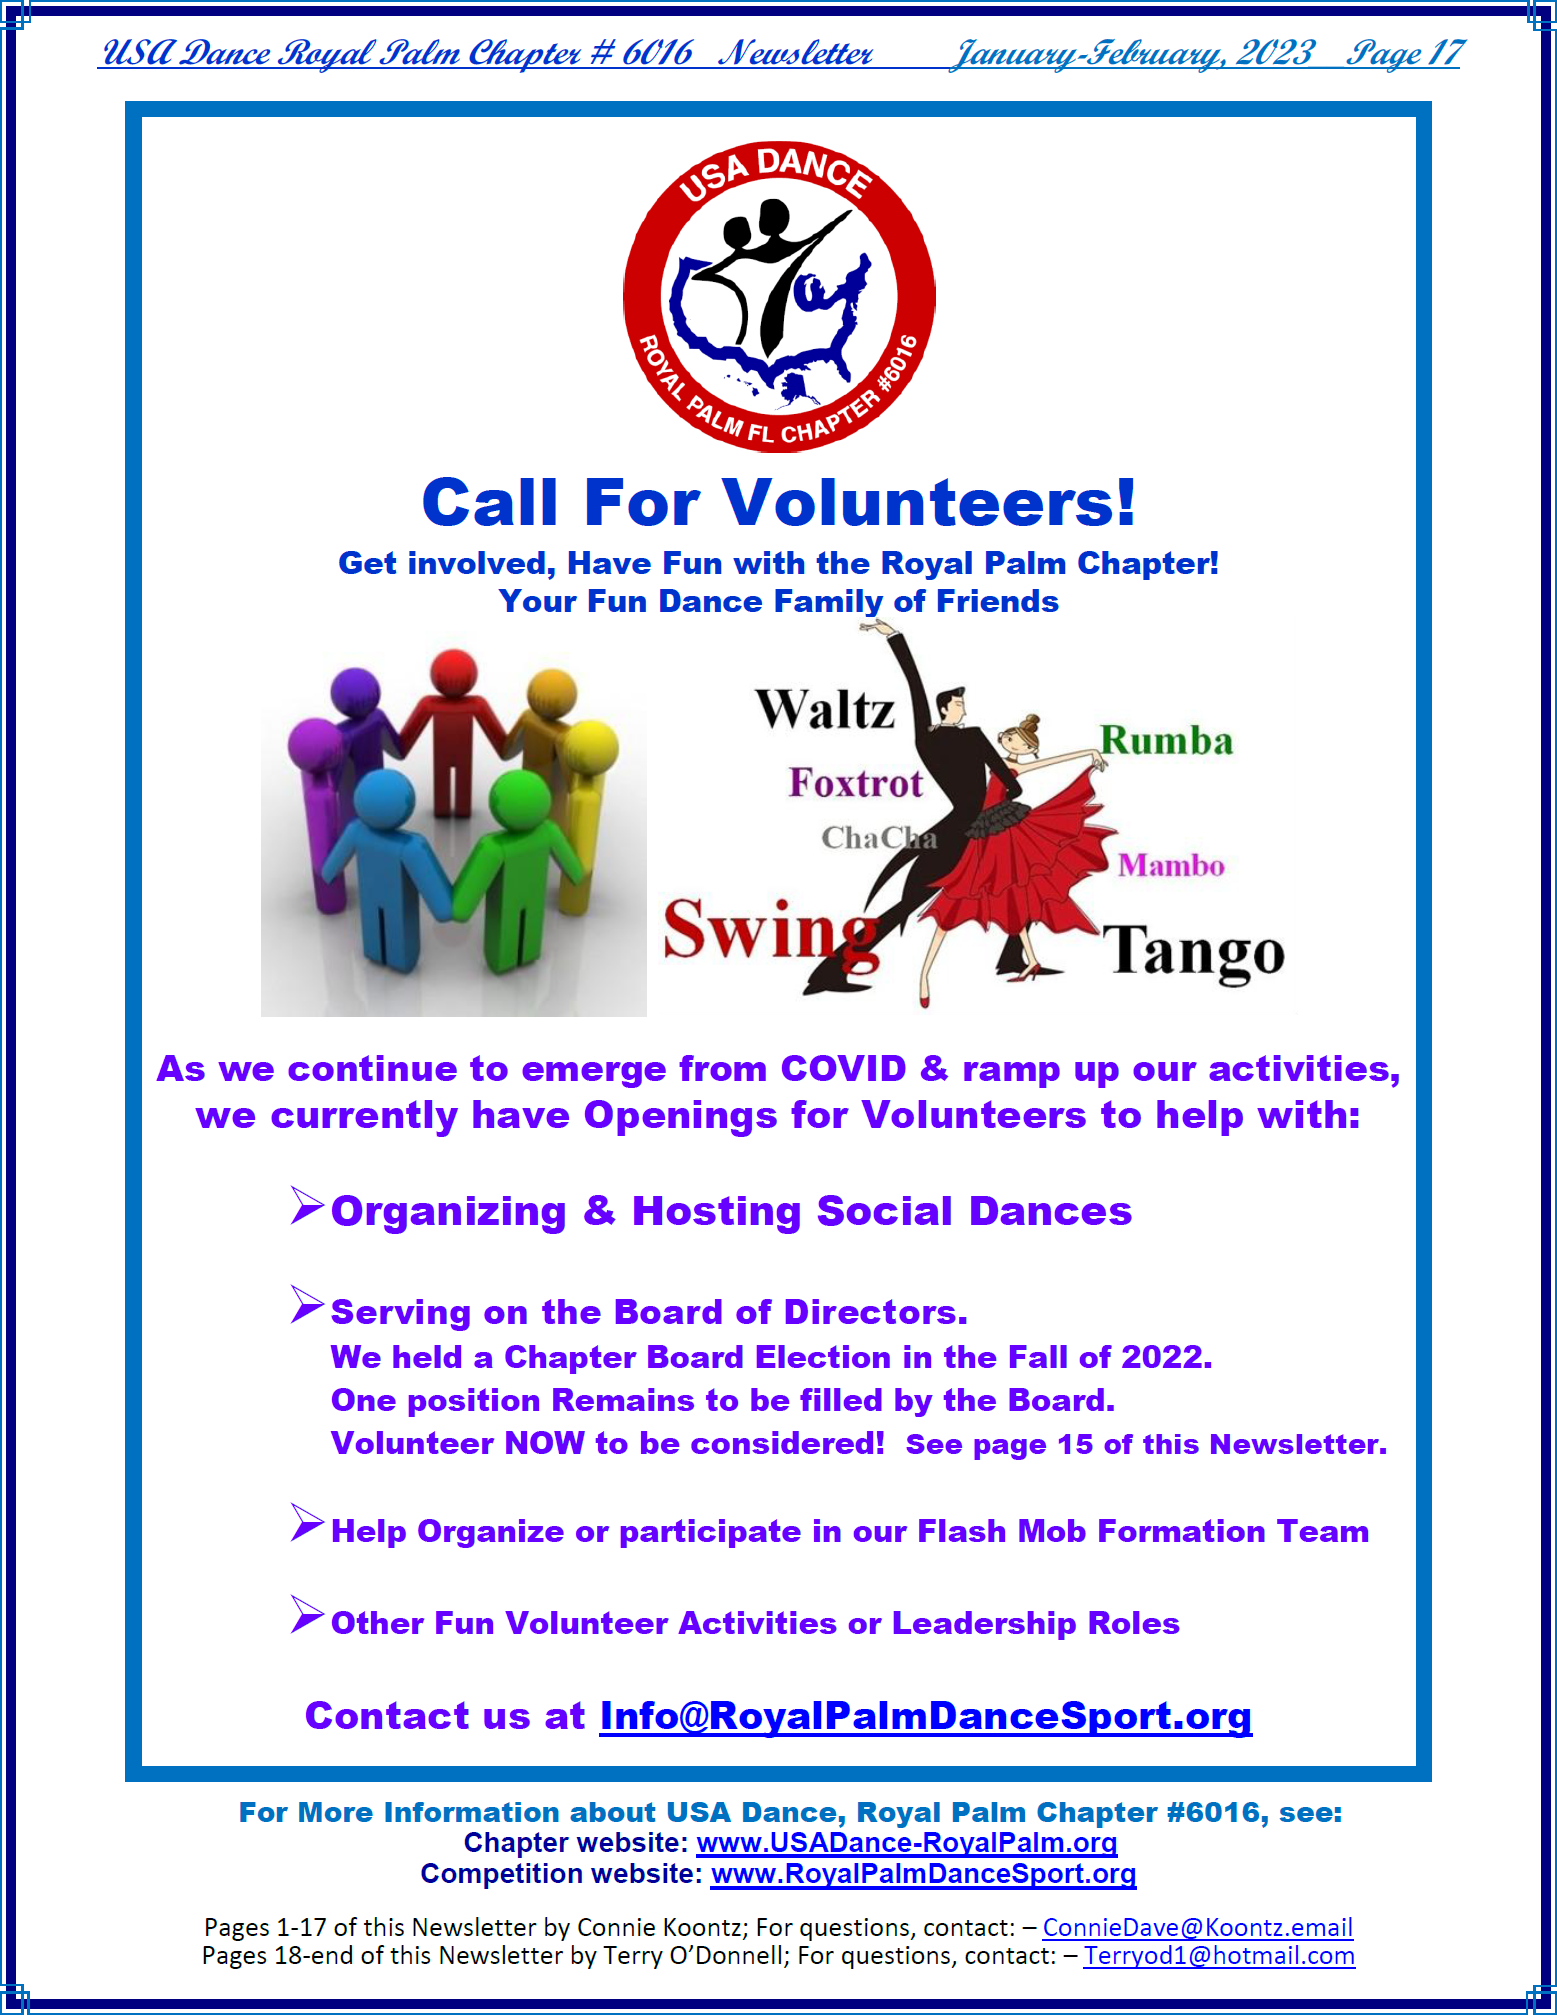 Volunteer - Have Fun with the Royal Palm Chapter!